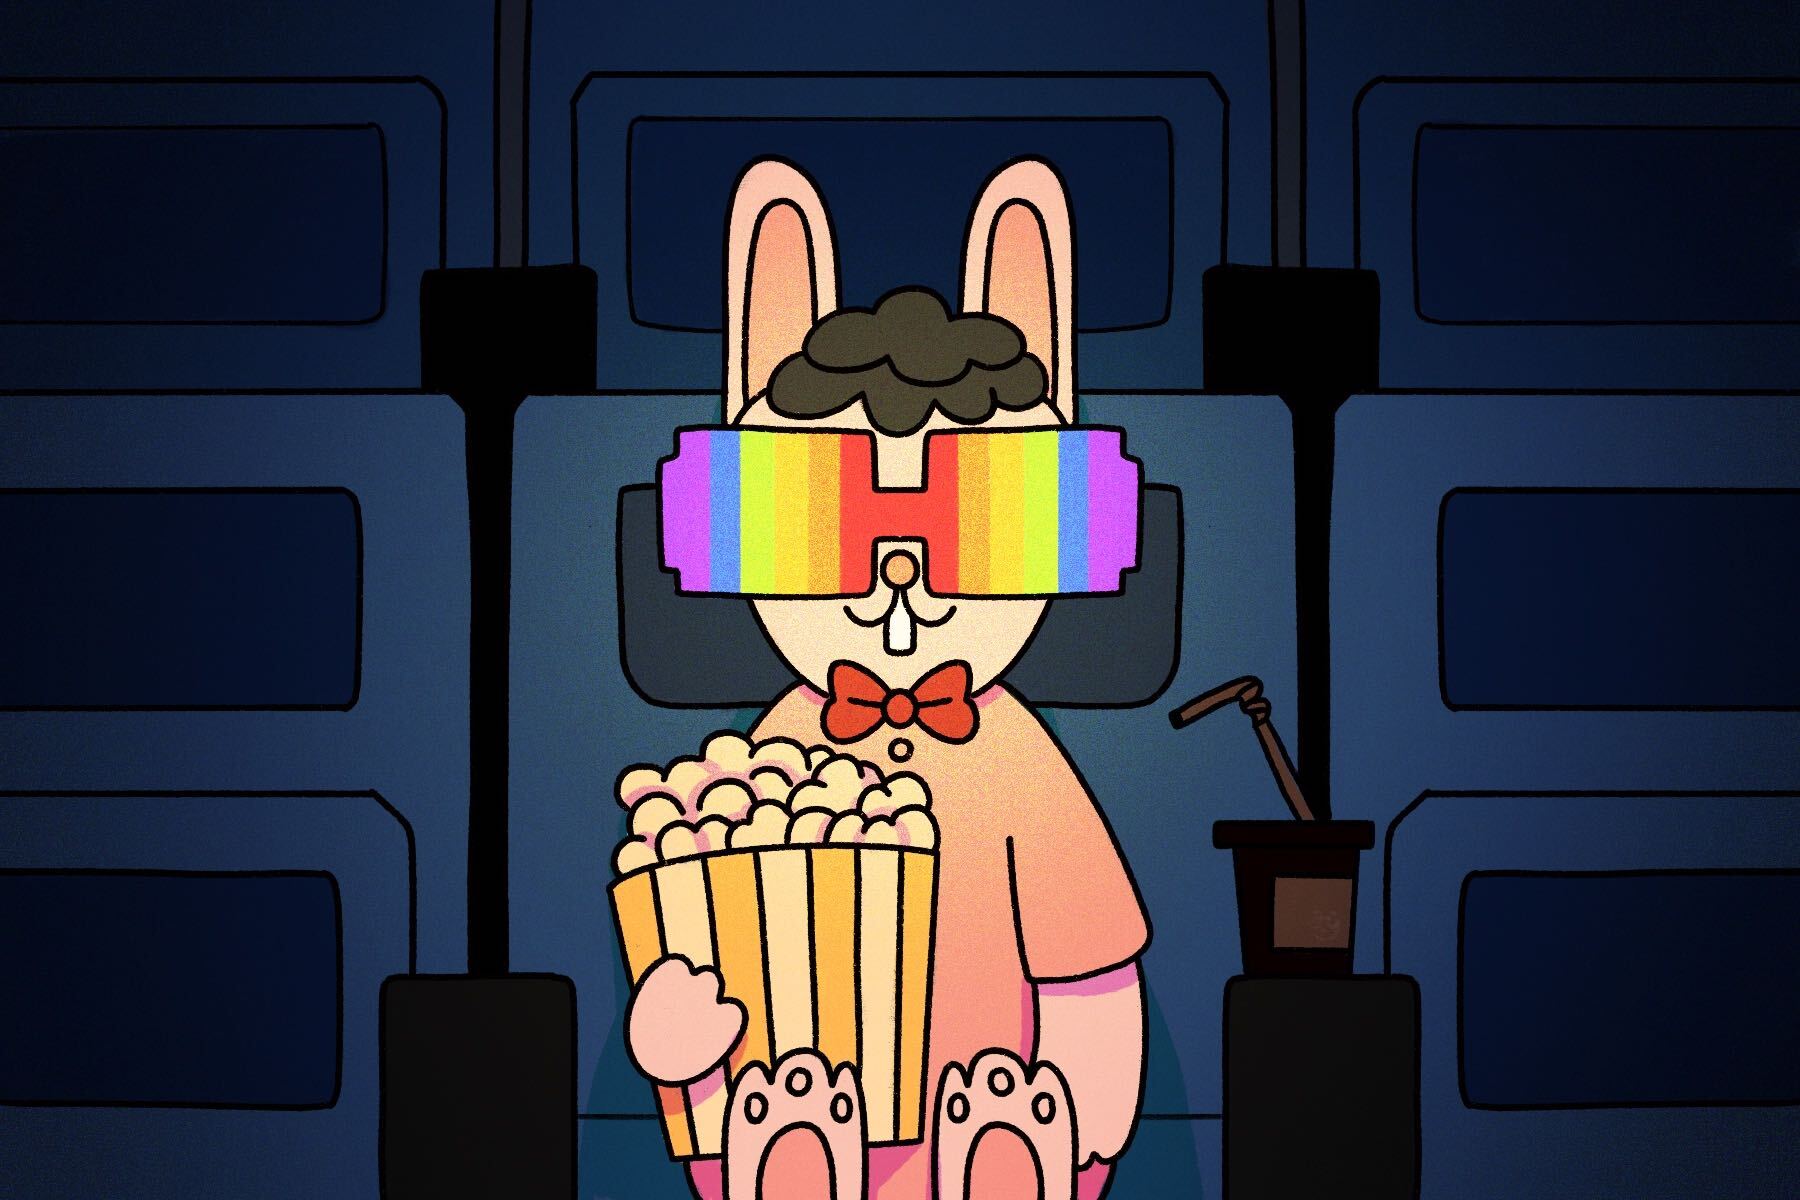 In an article about movies to watch for Pride Month, an illustration by Yao Jian of a rabbit with rainbow glasses in a movie theater with popcorn